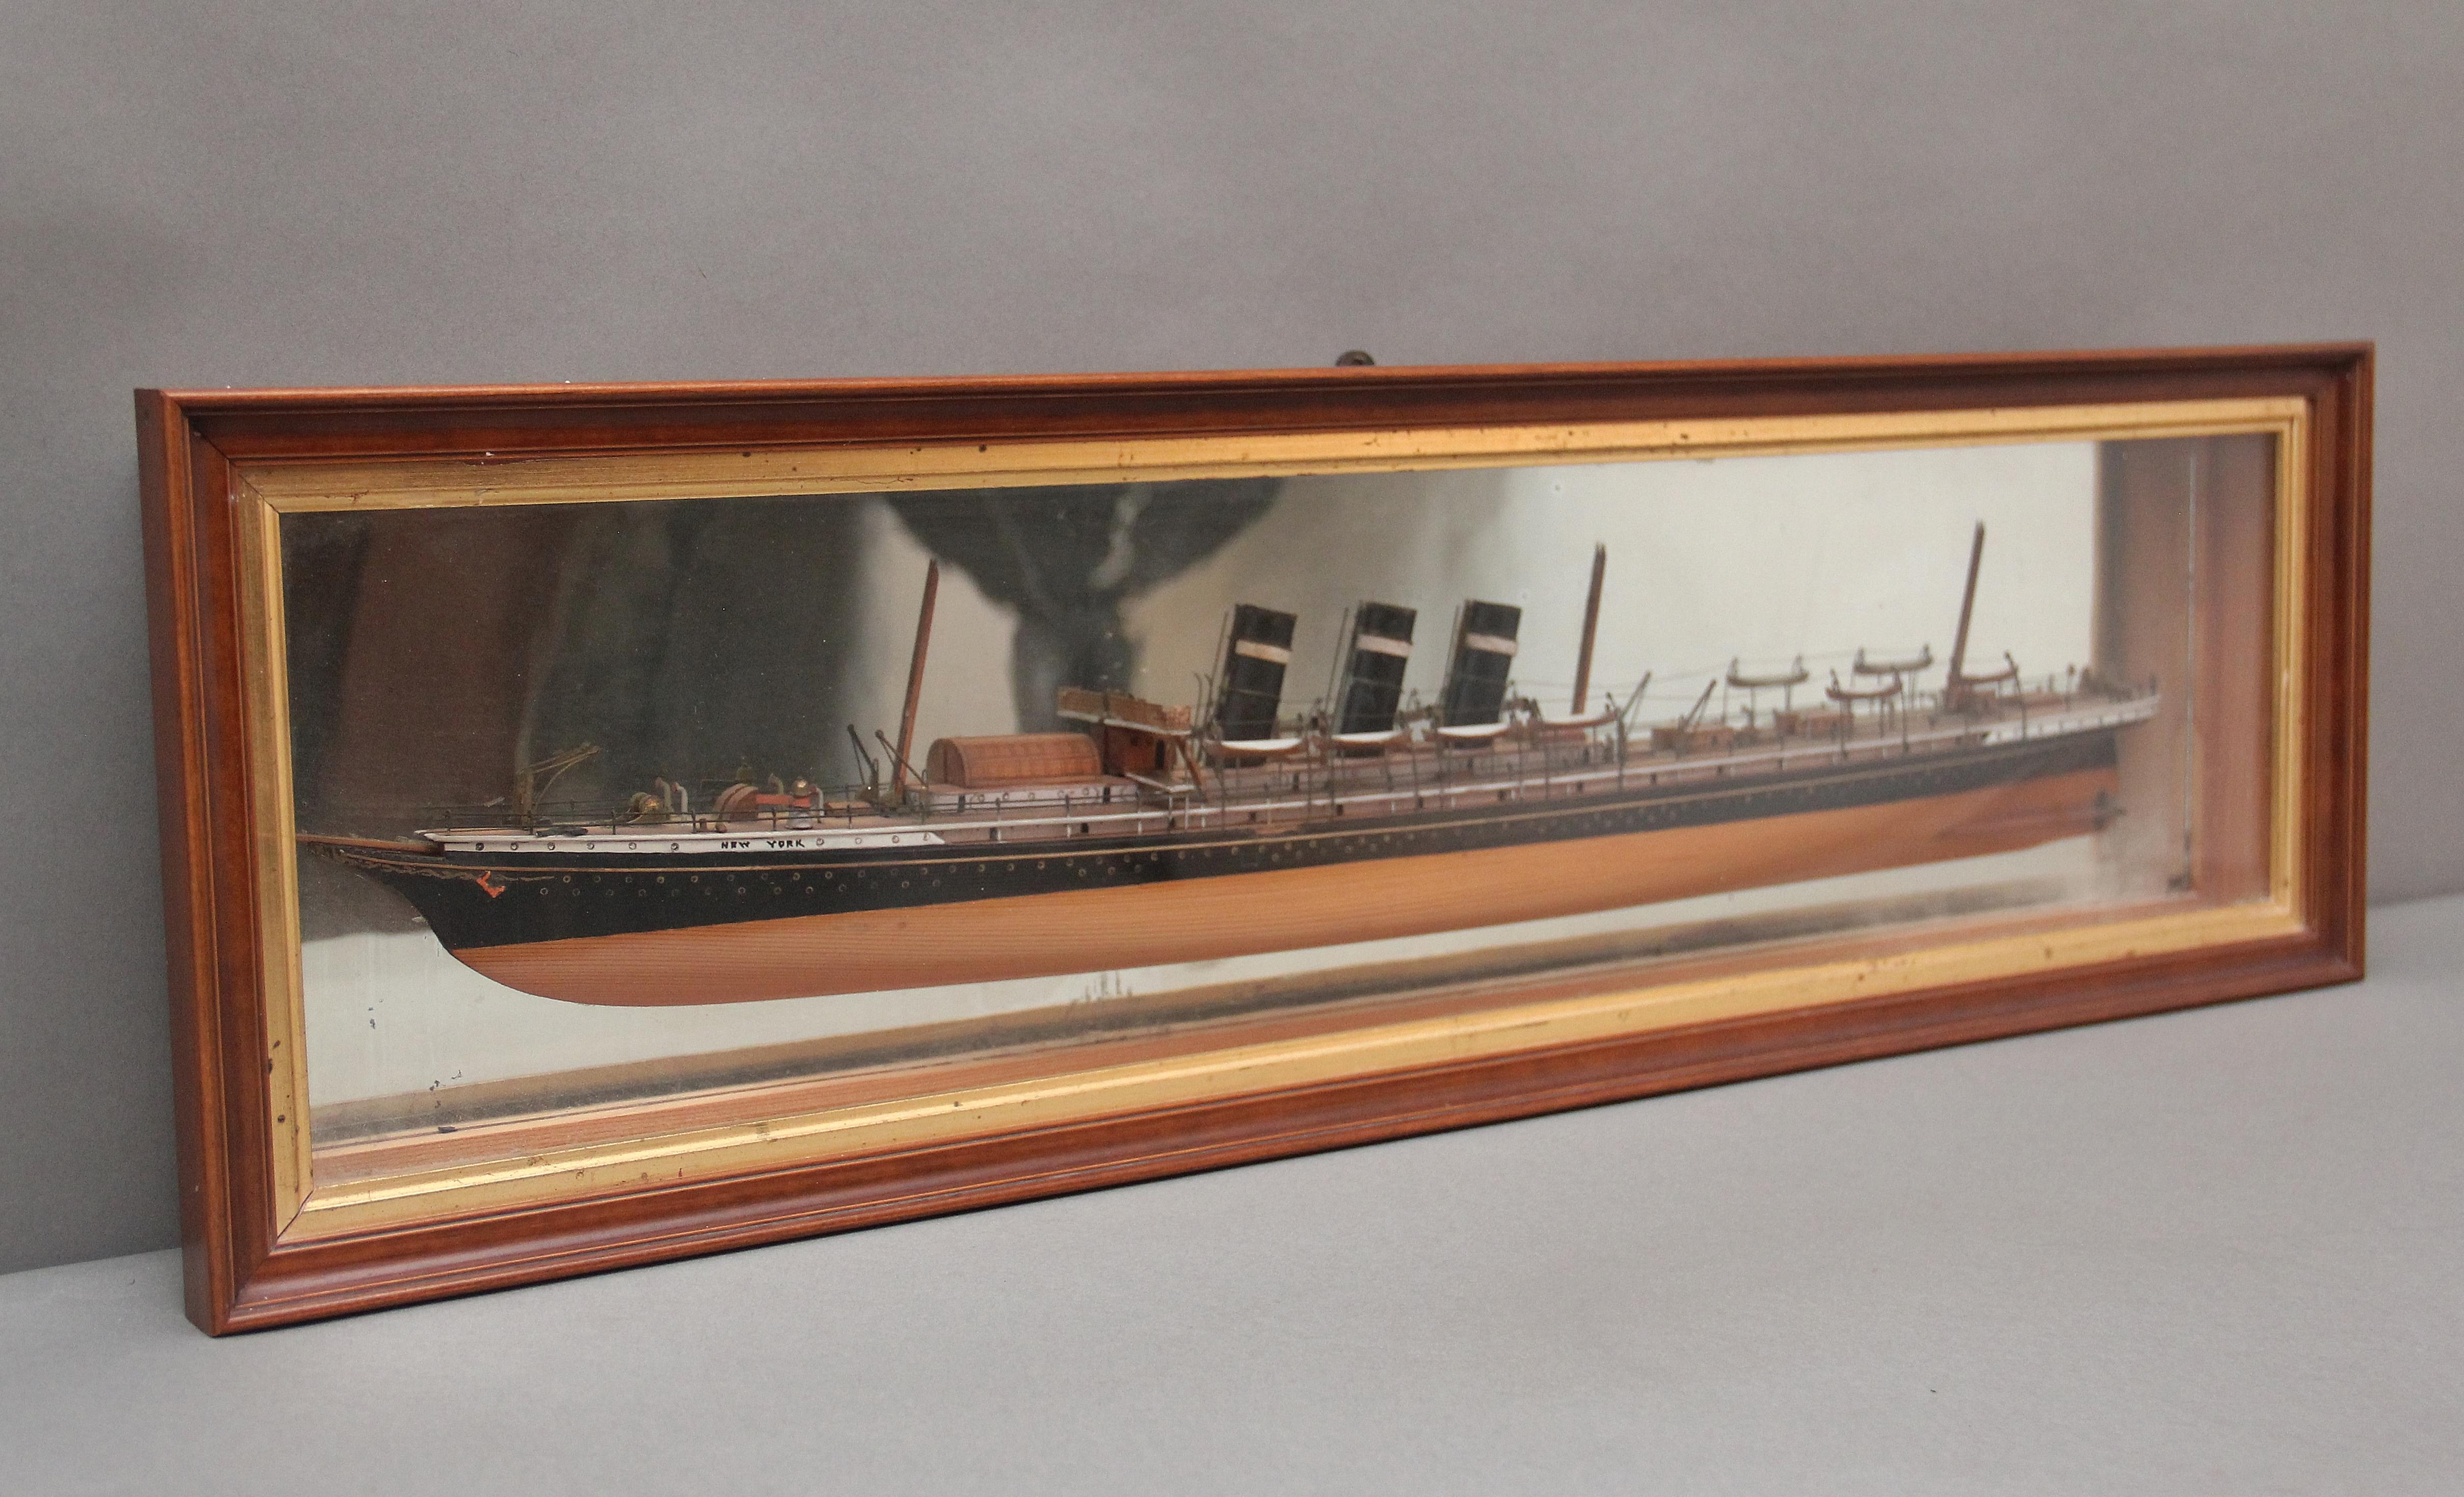 A fabulous quality 19th Century half model of the steam ship 